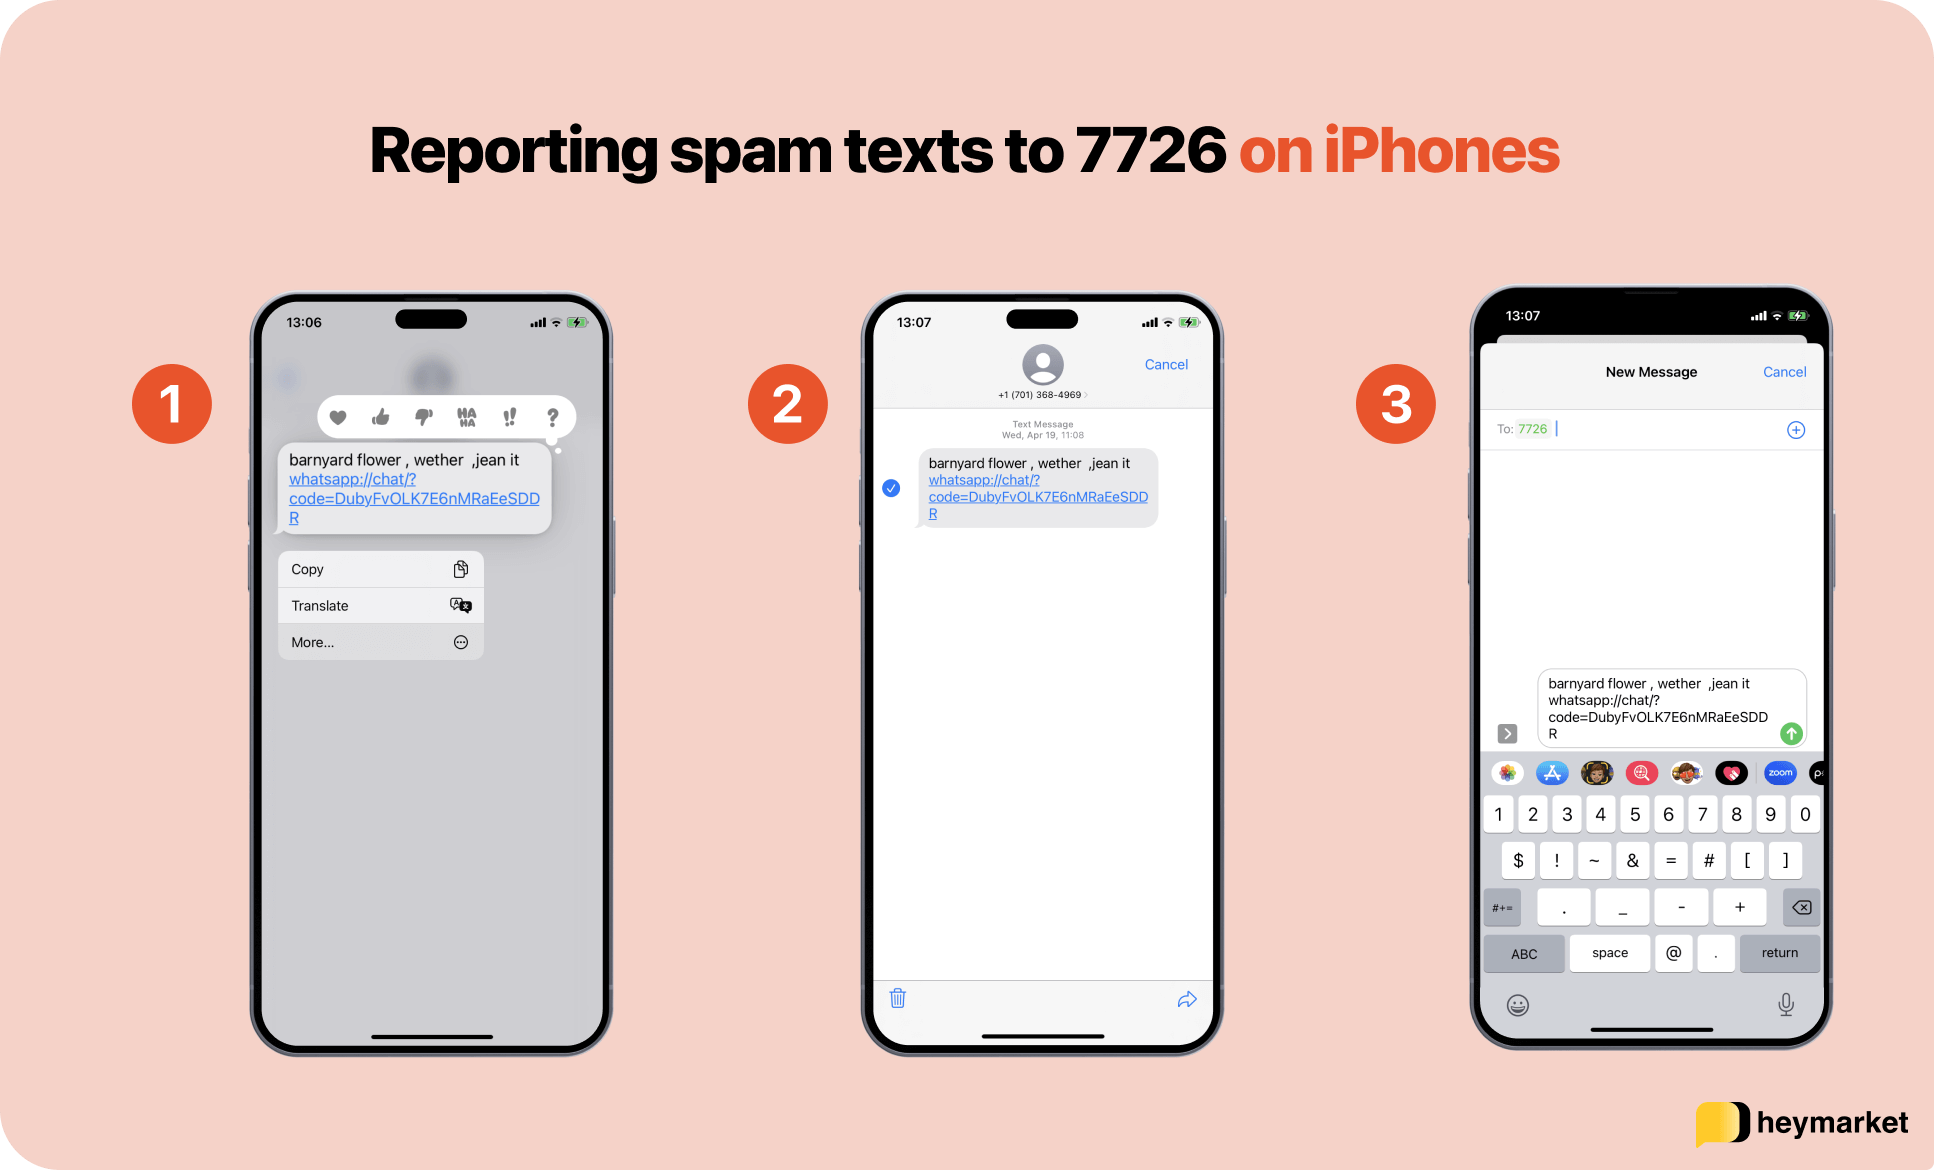 Steps for reporting a spam text to 7726 on iPhone